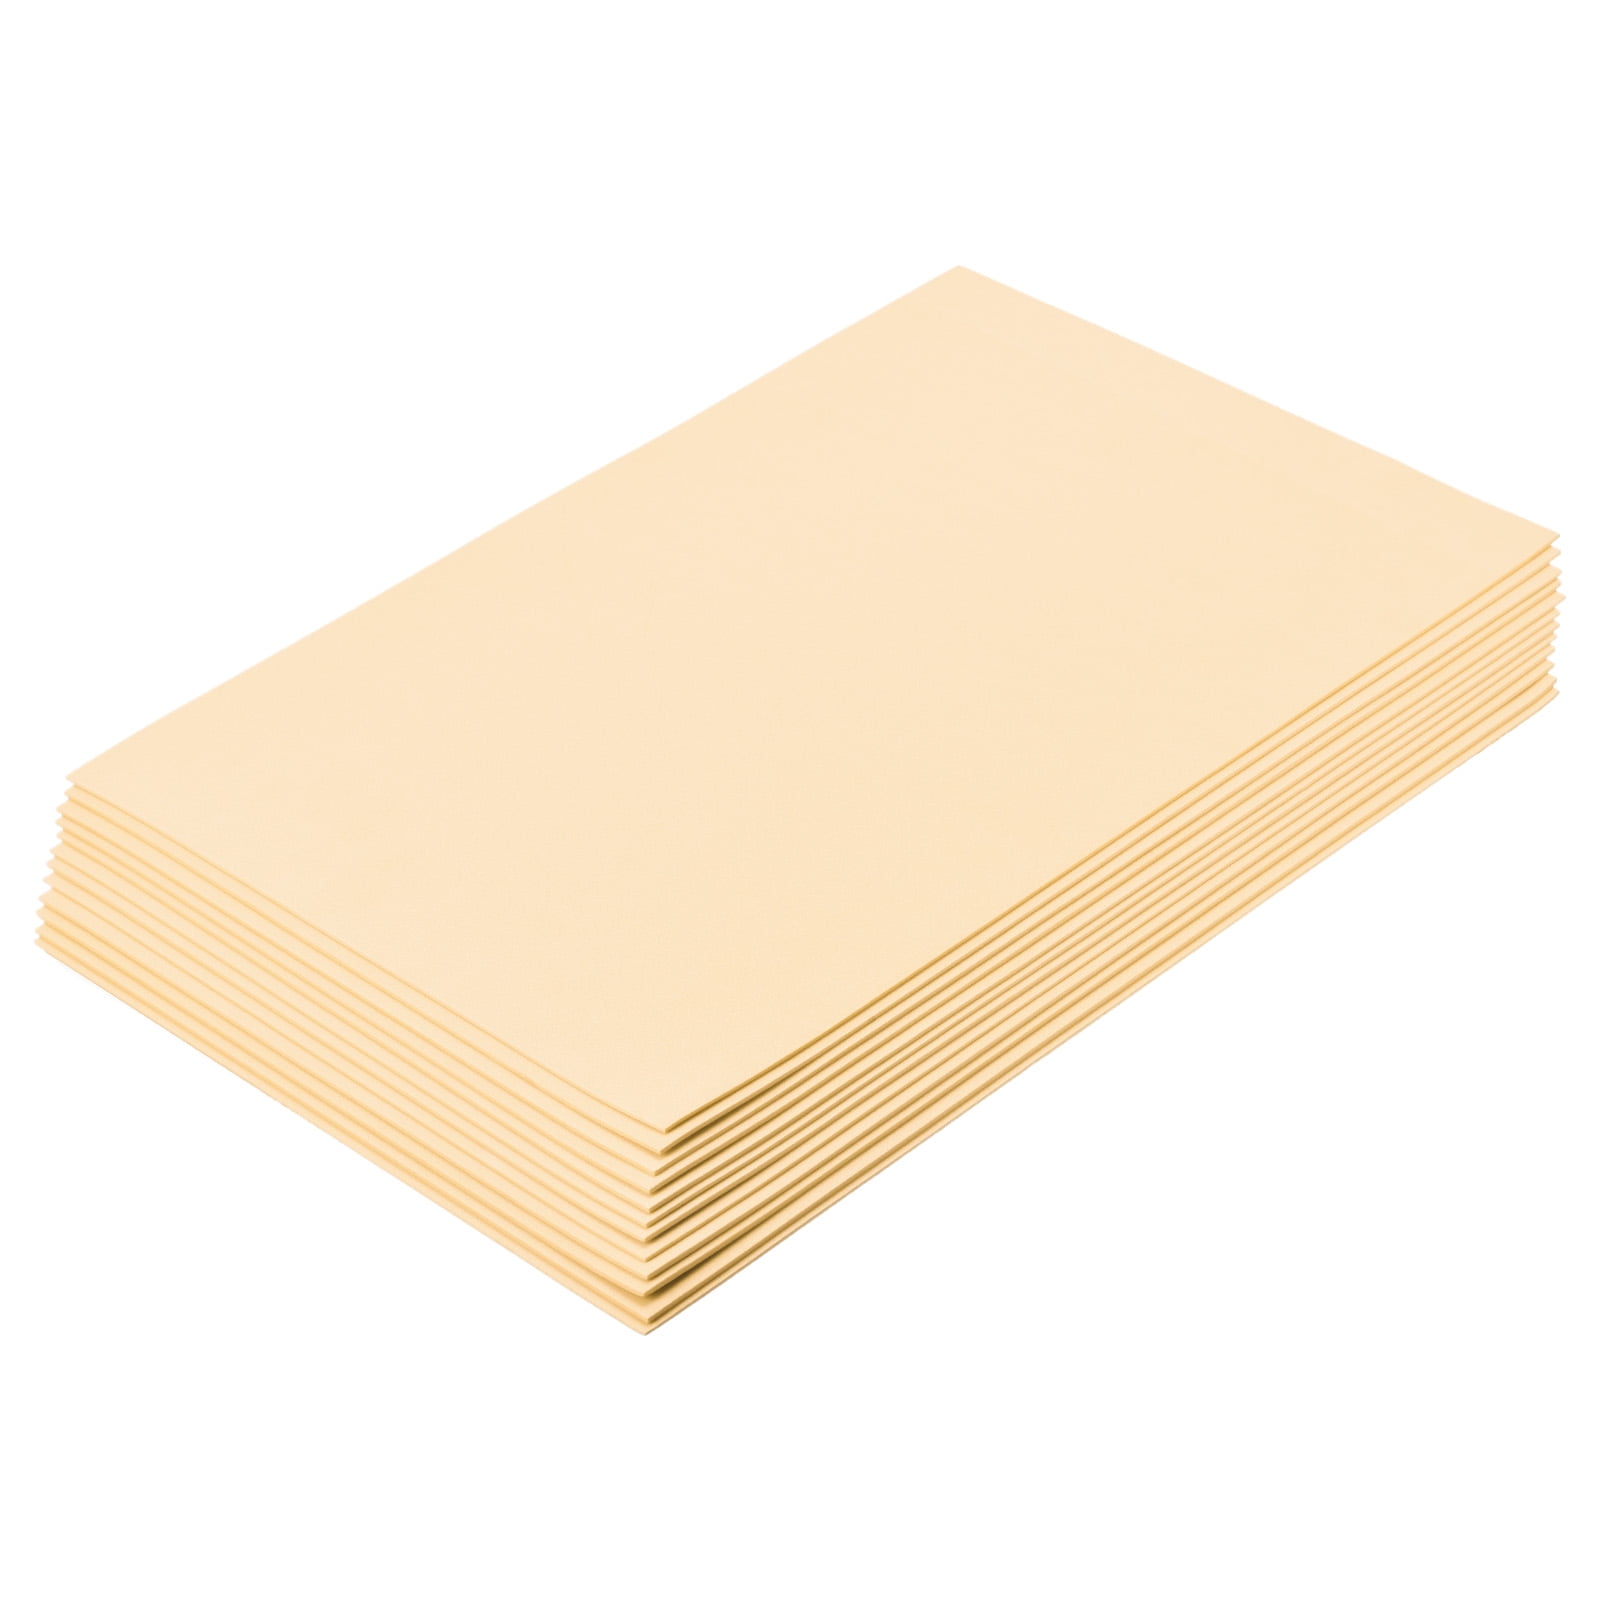  30 Pack EVA Foam Sheets, 11.8 x 7.87 Inch, 2mm Thick Foam Paper  for Arts and Crafts, Perfect for Kids Art Projects and Cosplay (Beige) :  Arts, Crafts & Sewing